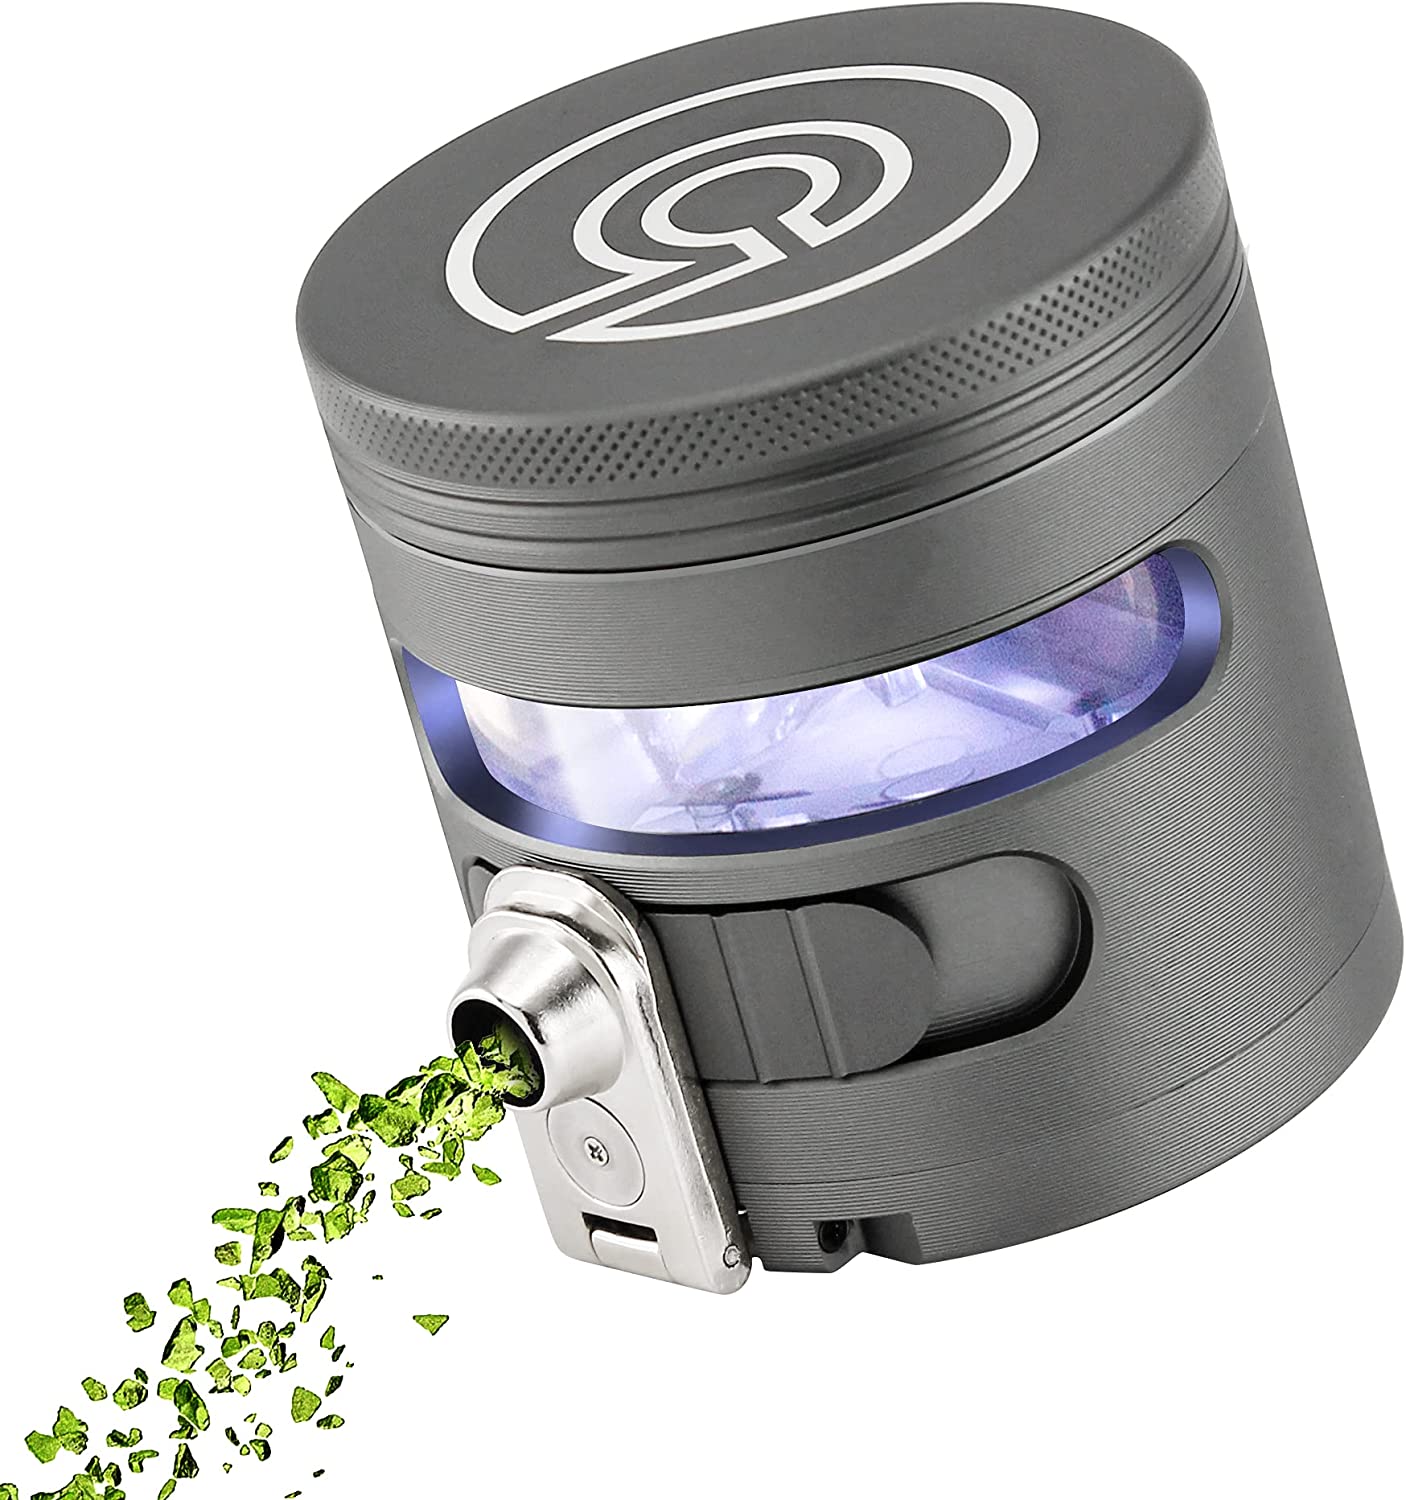 Cannabinthusiast | Eight Practical Gifts for your Favorite Pothead - Tectonic 9 Herb Grinder